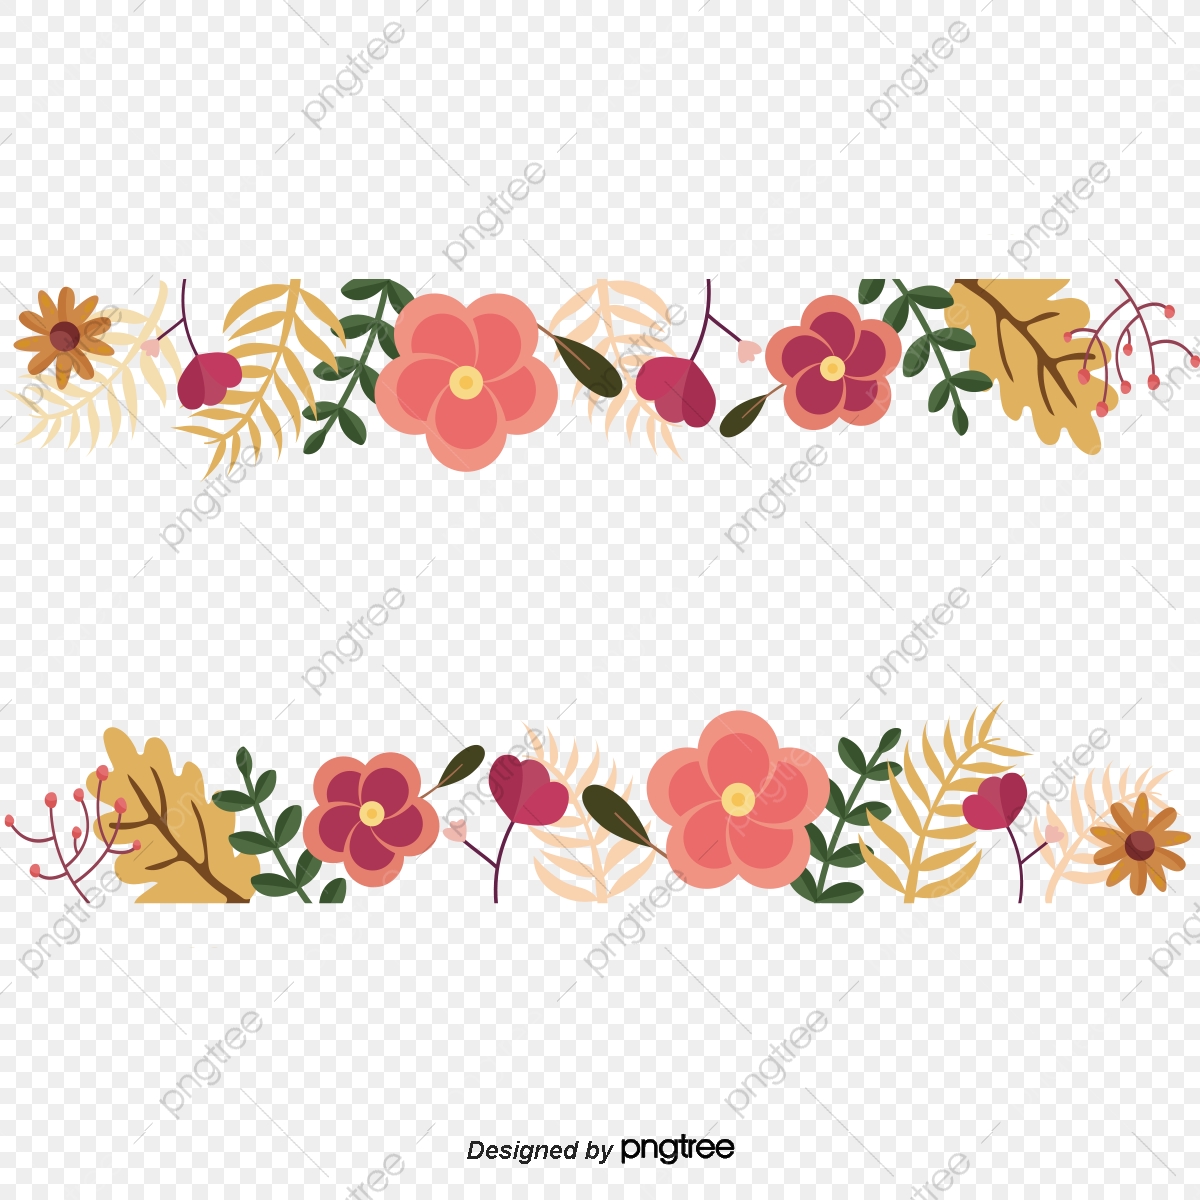 Autumn Floral Wallpapers